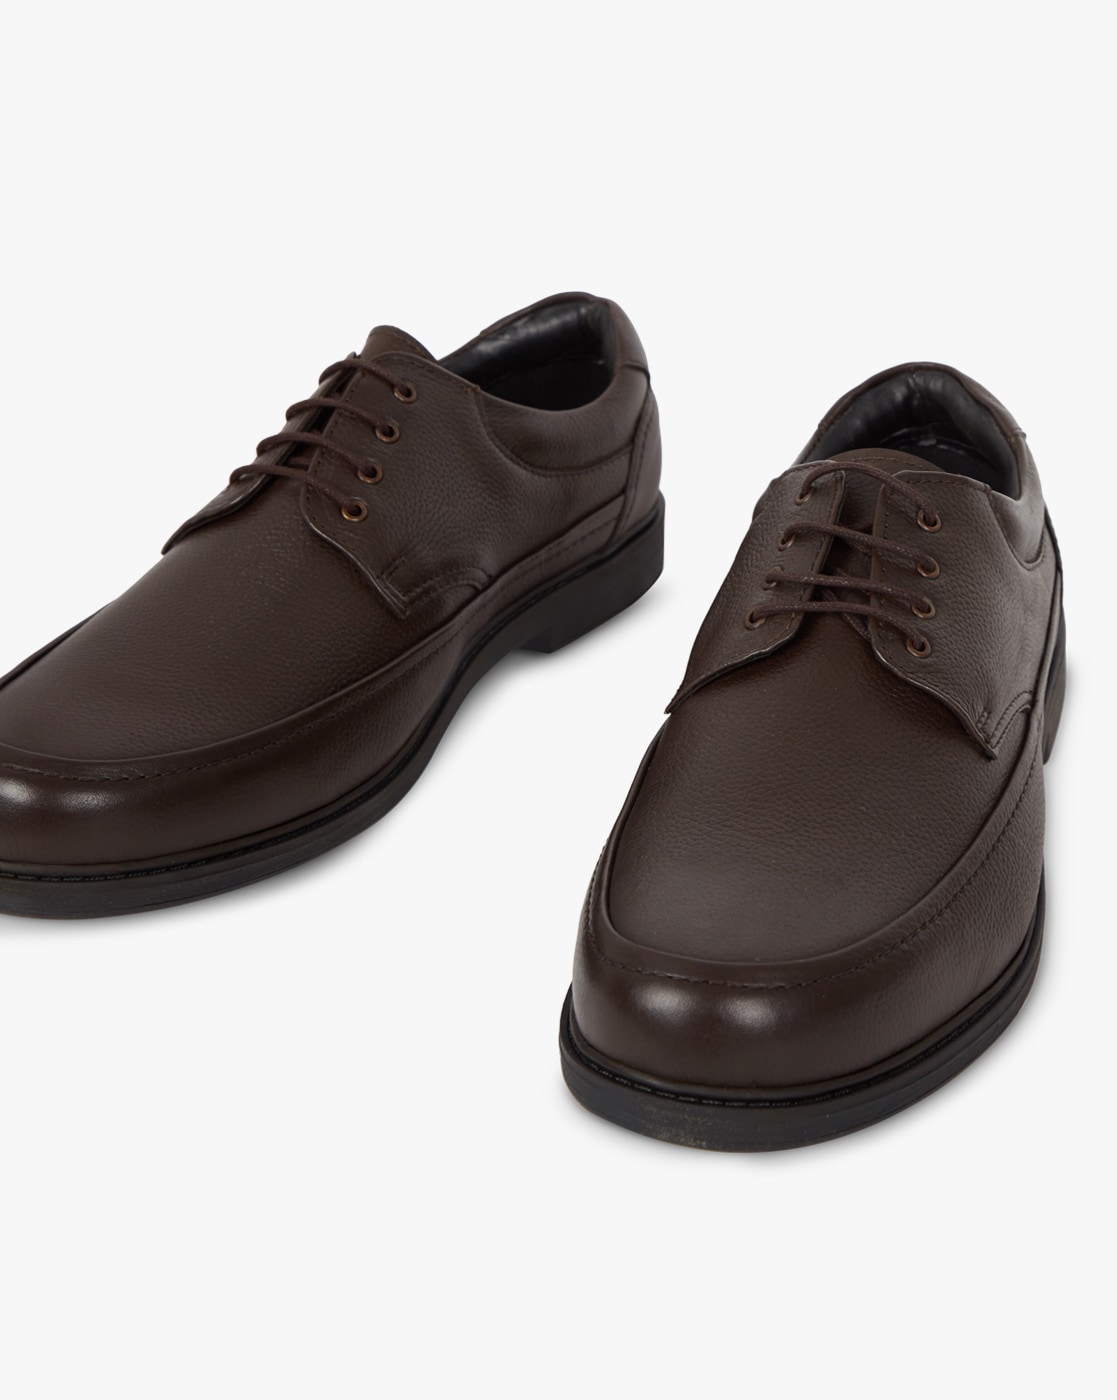 Chocolate Brown Formal Shoes for Men 